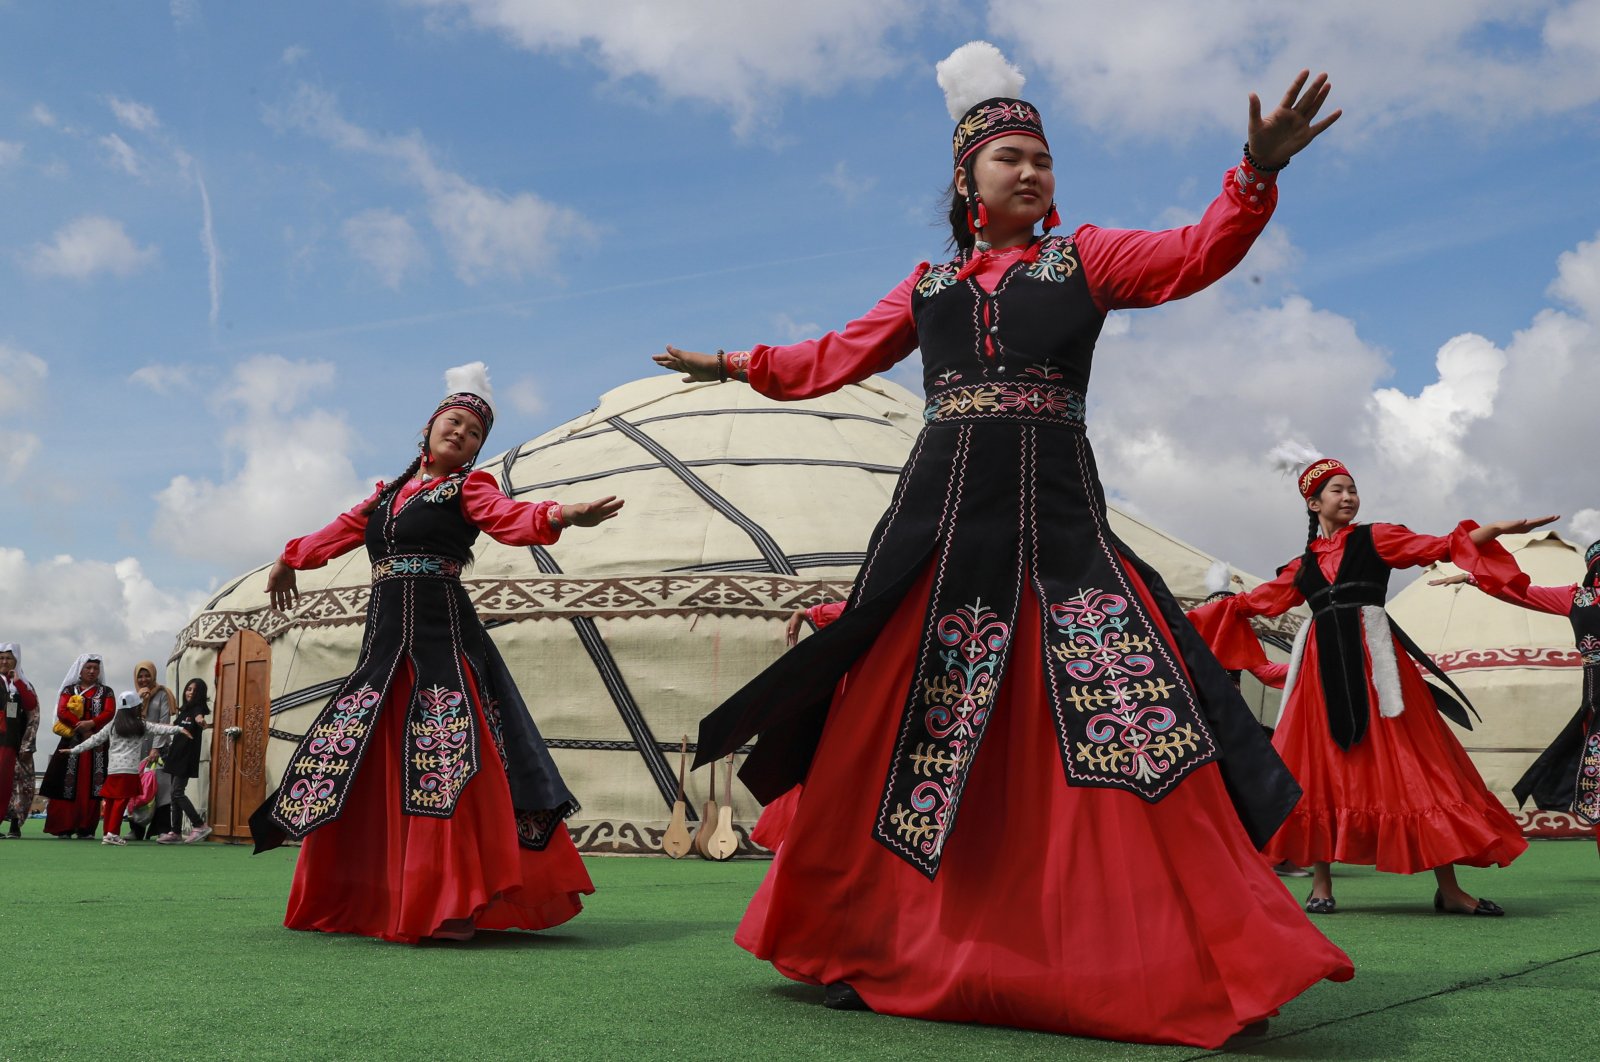 Kyrgyz traditional dancers perform at the 5th Ethnosports Culture Festival, Istanbul, Turkey, June 12, 2022. (AA Photo)